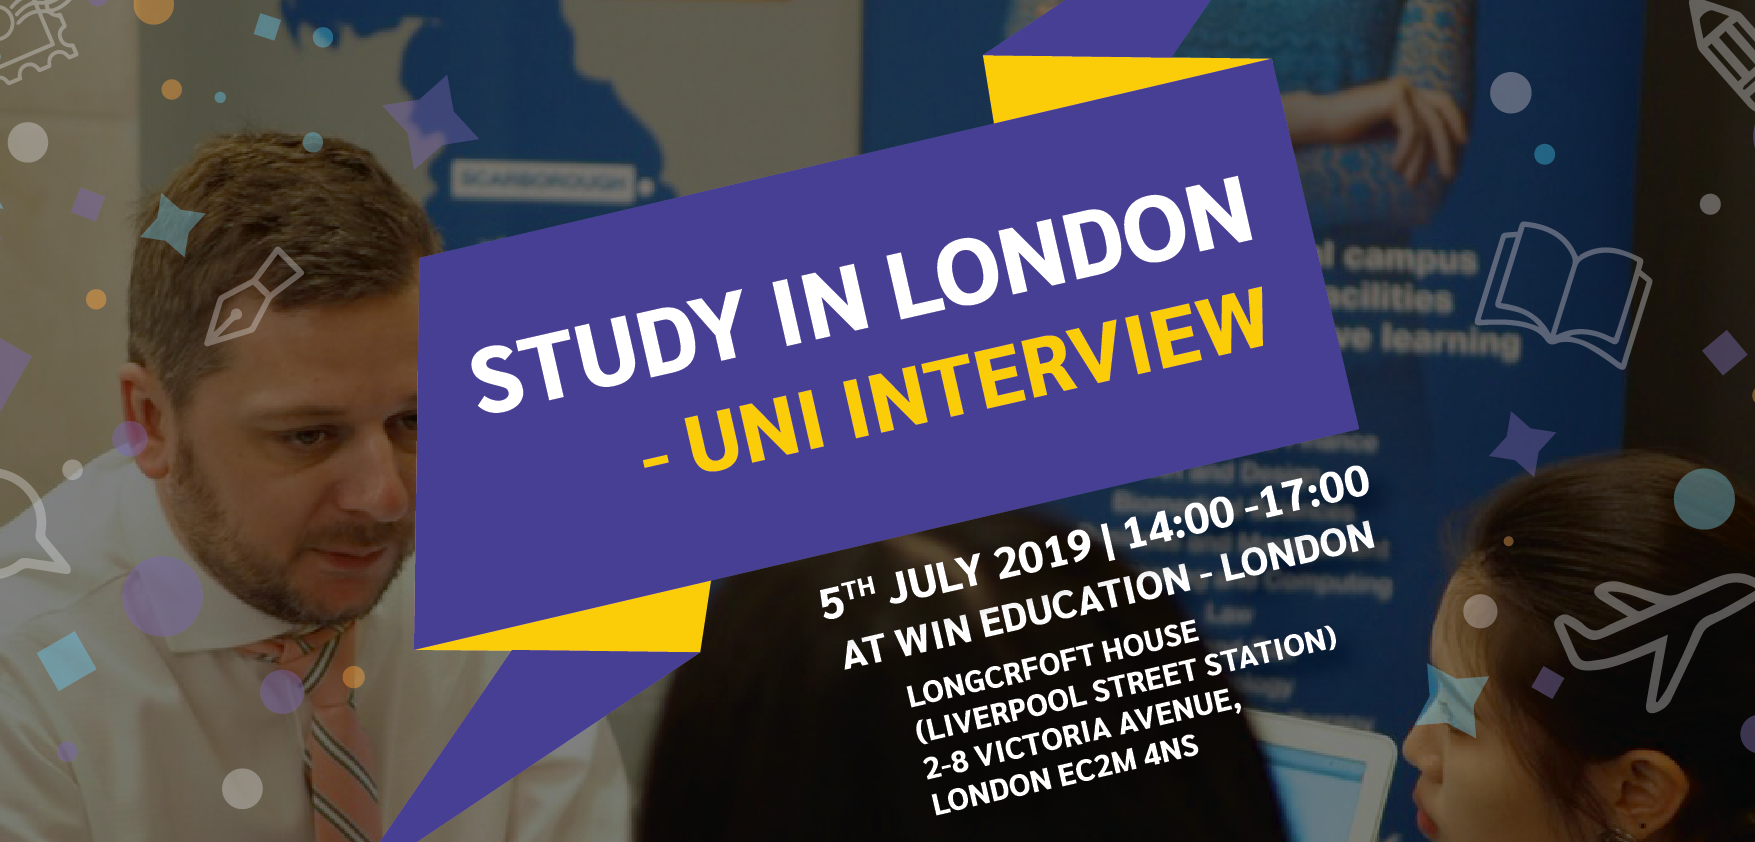 Study in London – Uni Interview